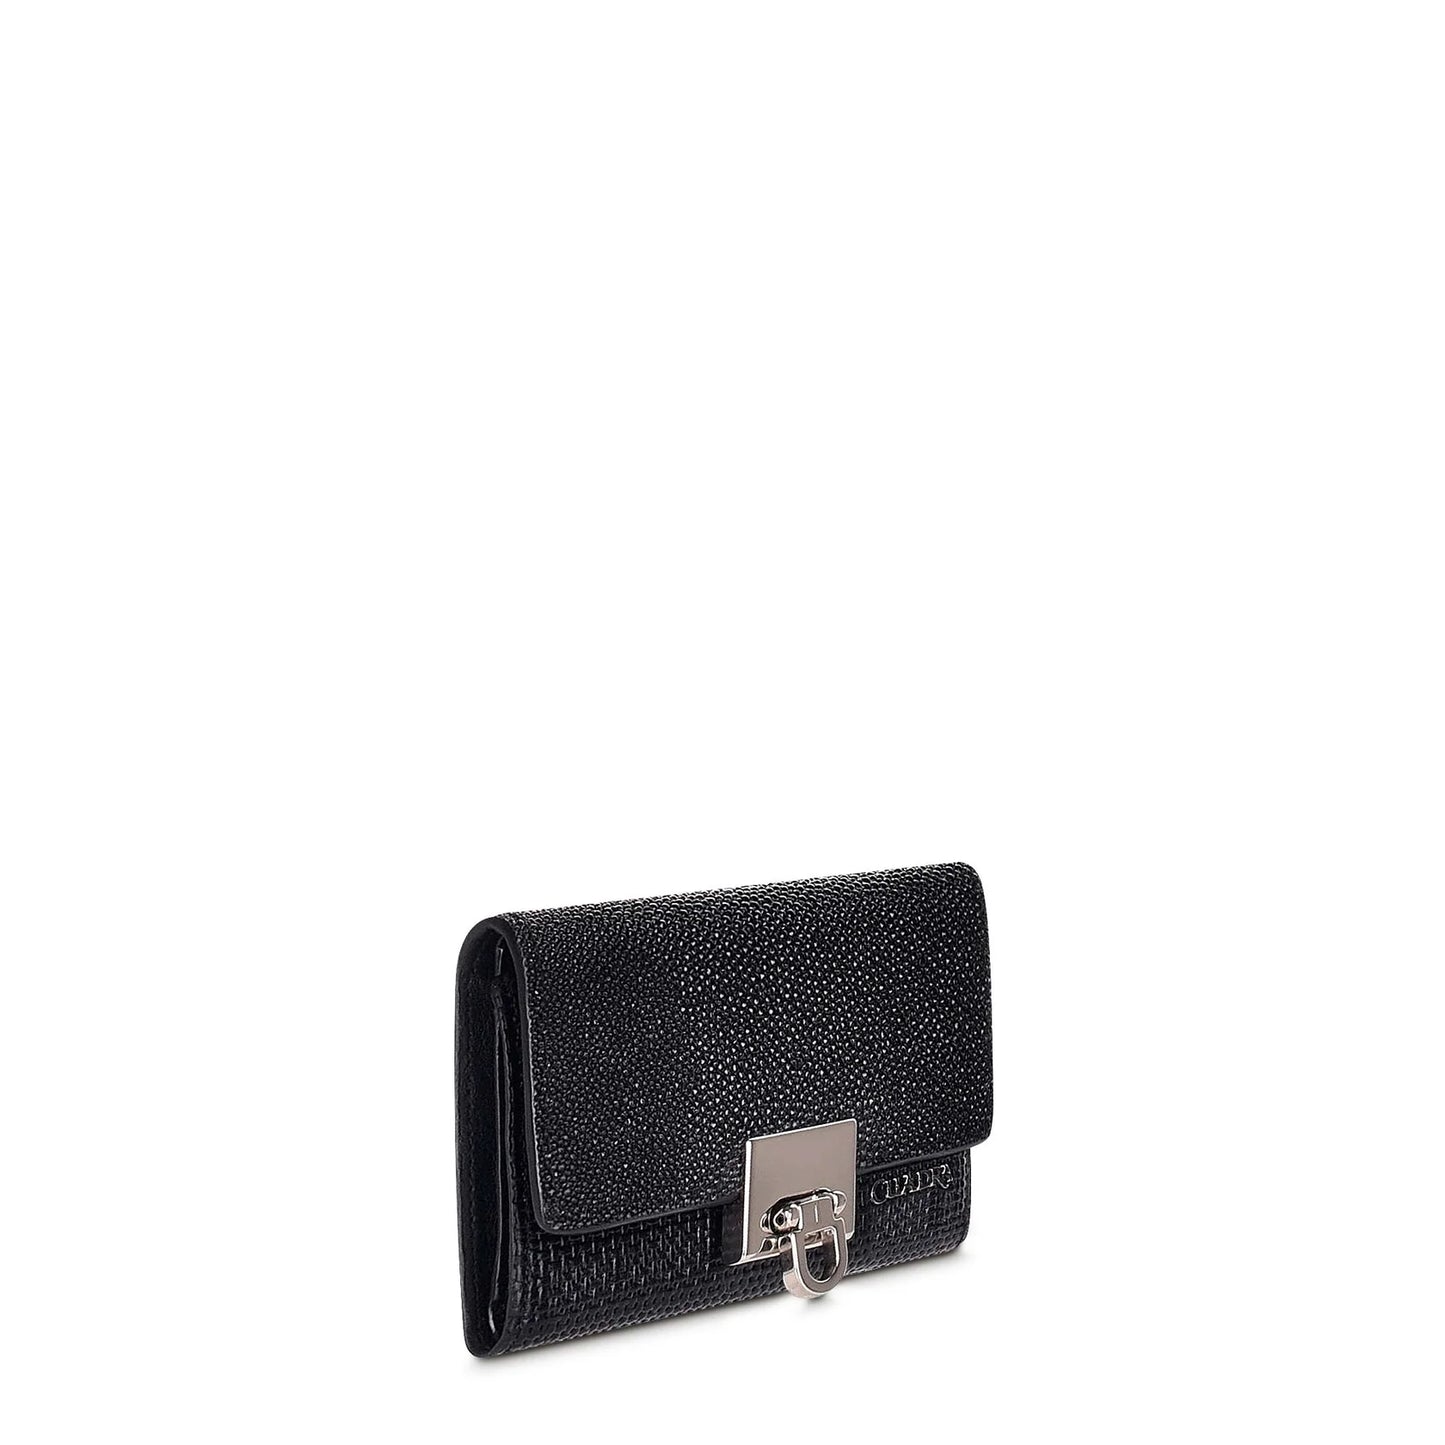 Cuadra engraved black leather trifold wallet